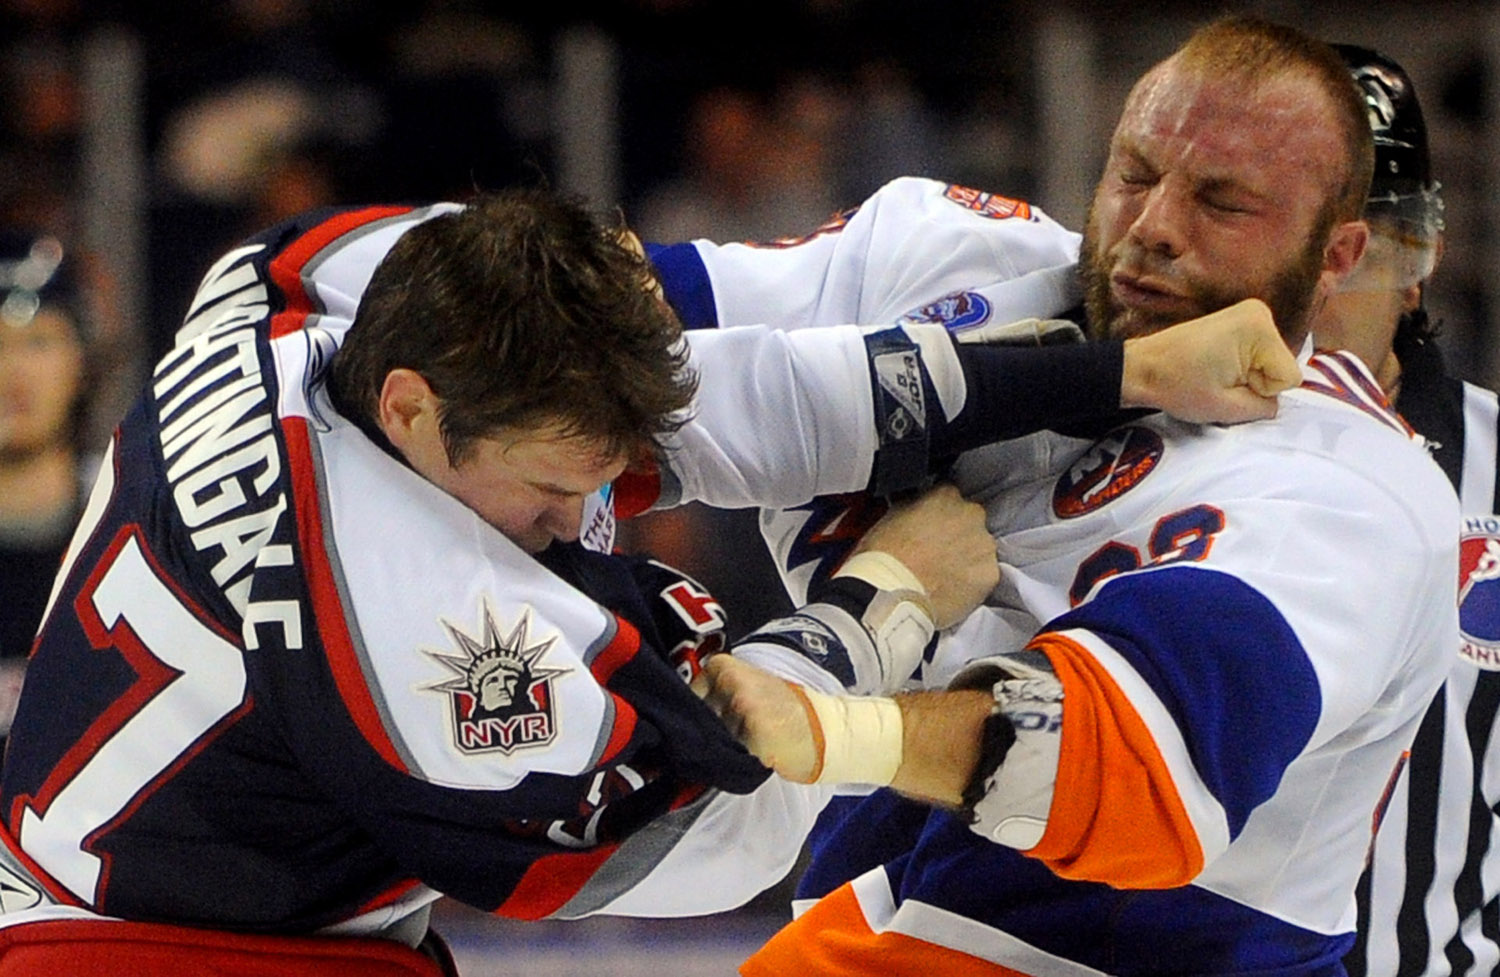  Soundtiger Jeremy Yablonski fights with Jared Nightingale during Saturday's game against the Hartford Wolf Pack at the Arena at Harbor Yard on November 6, 2010. 